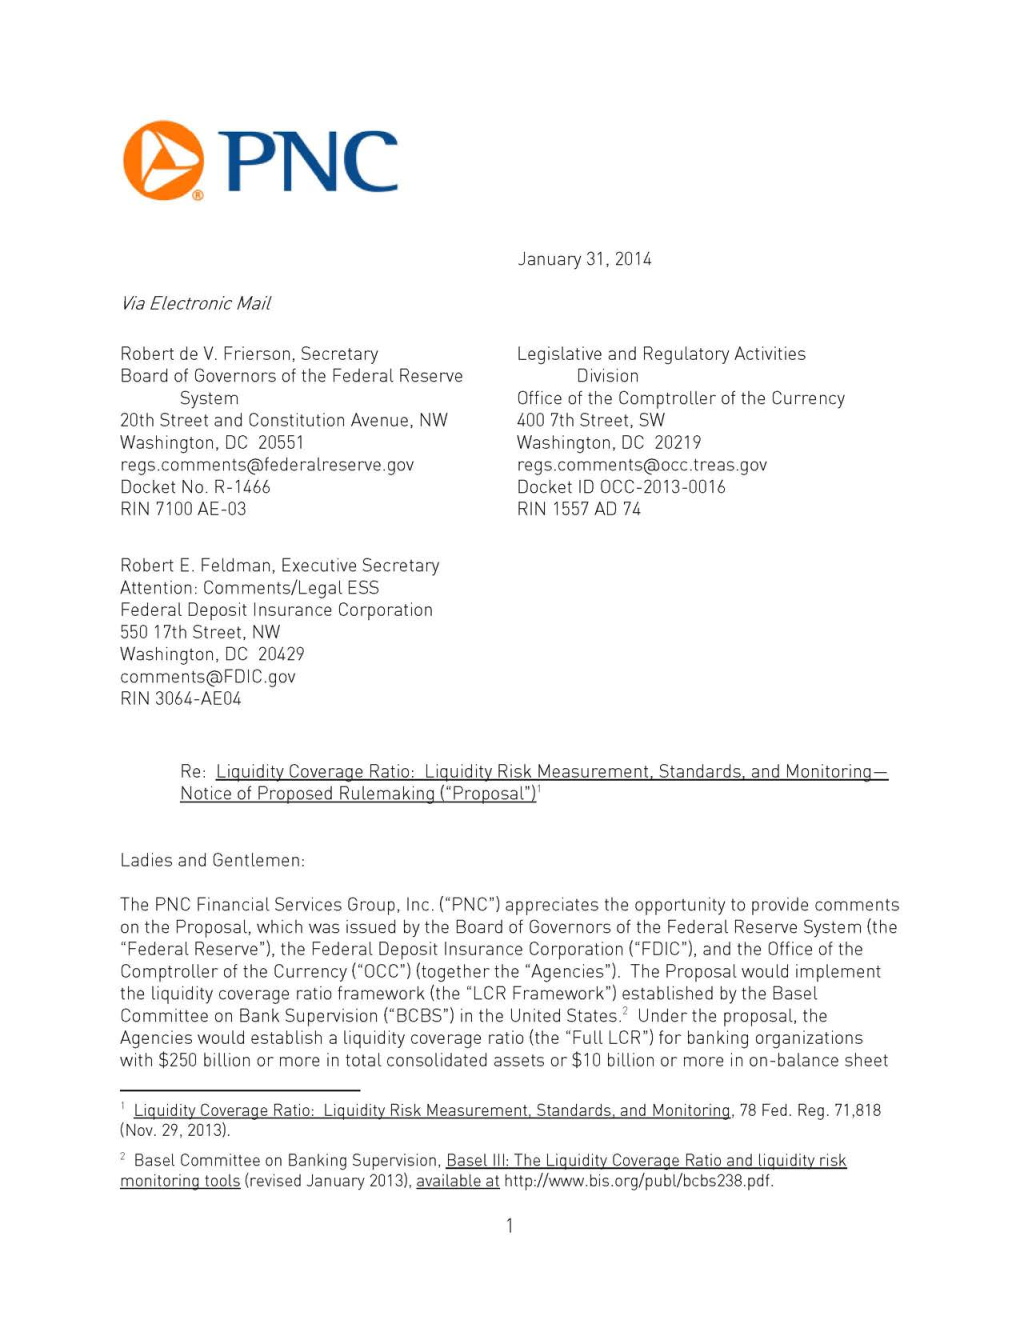 Comments of the PNC Financial Services Group